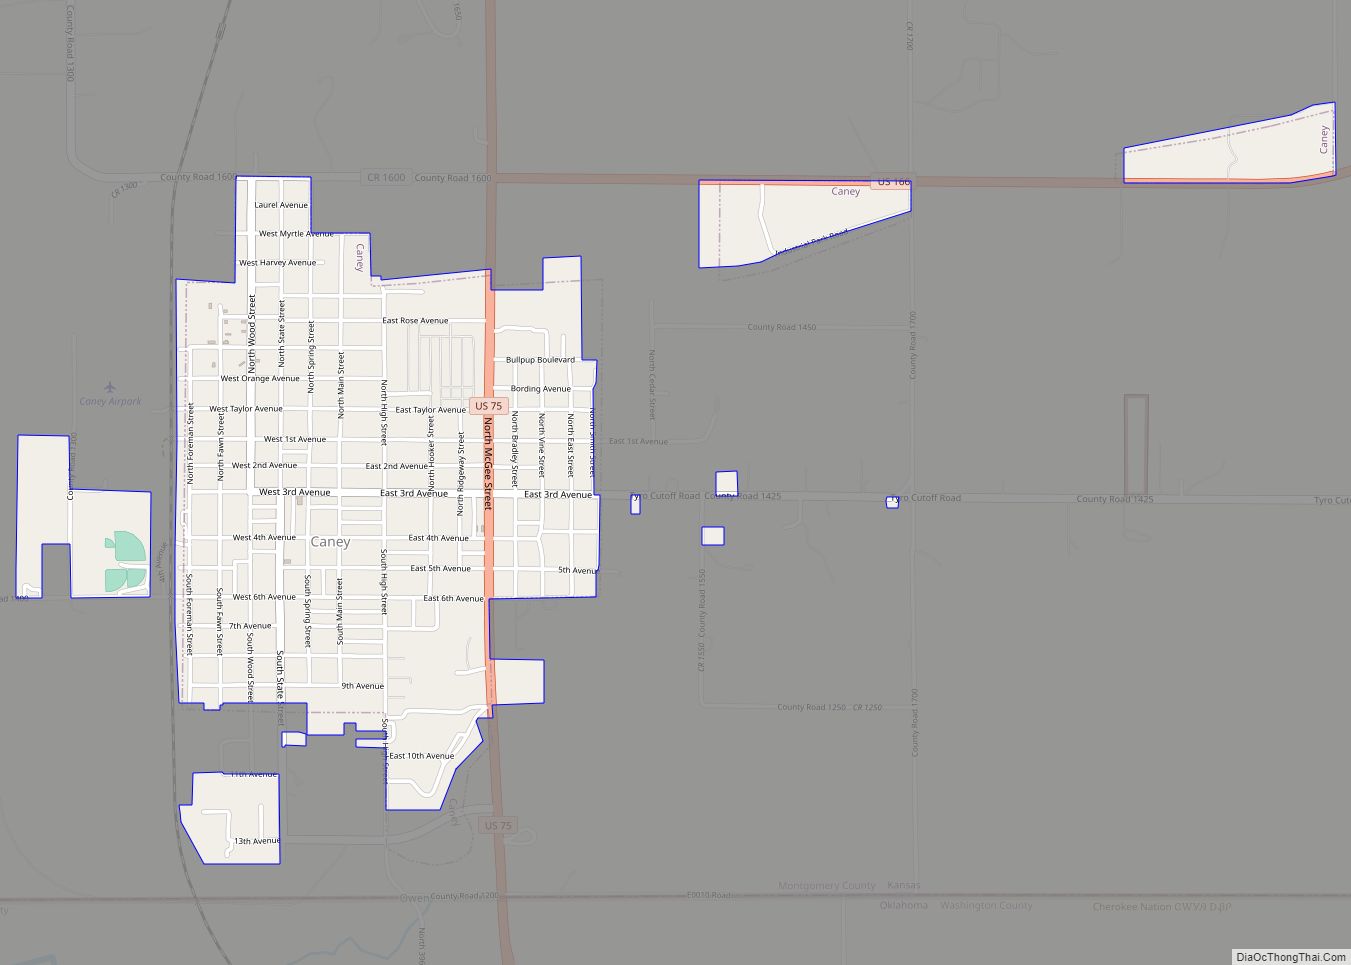 Map of Caney city